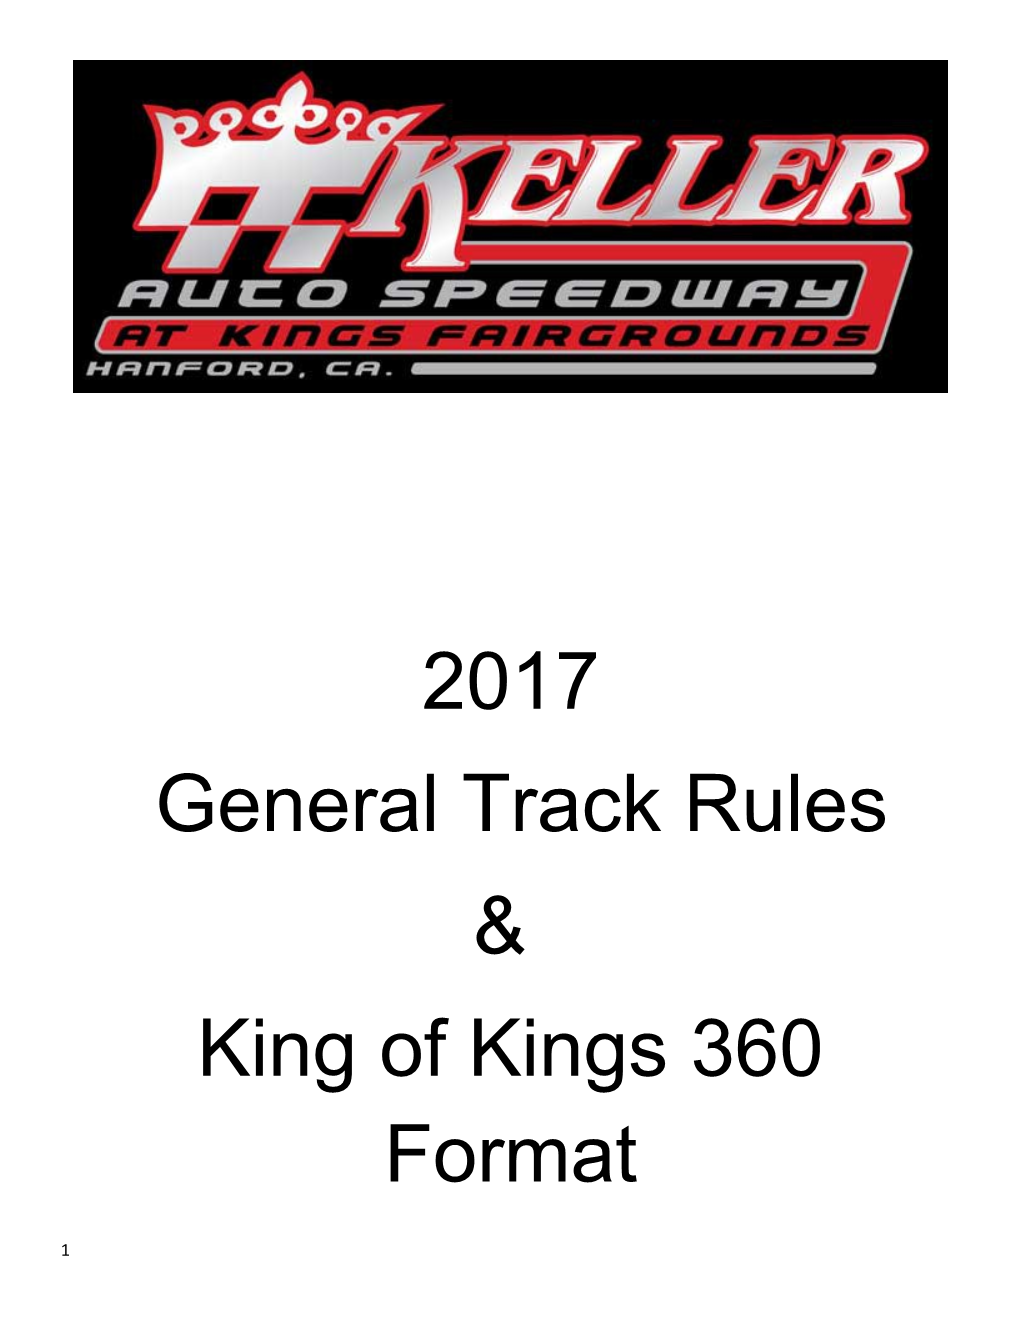 General Track Rules